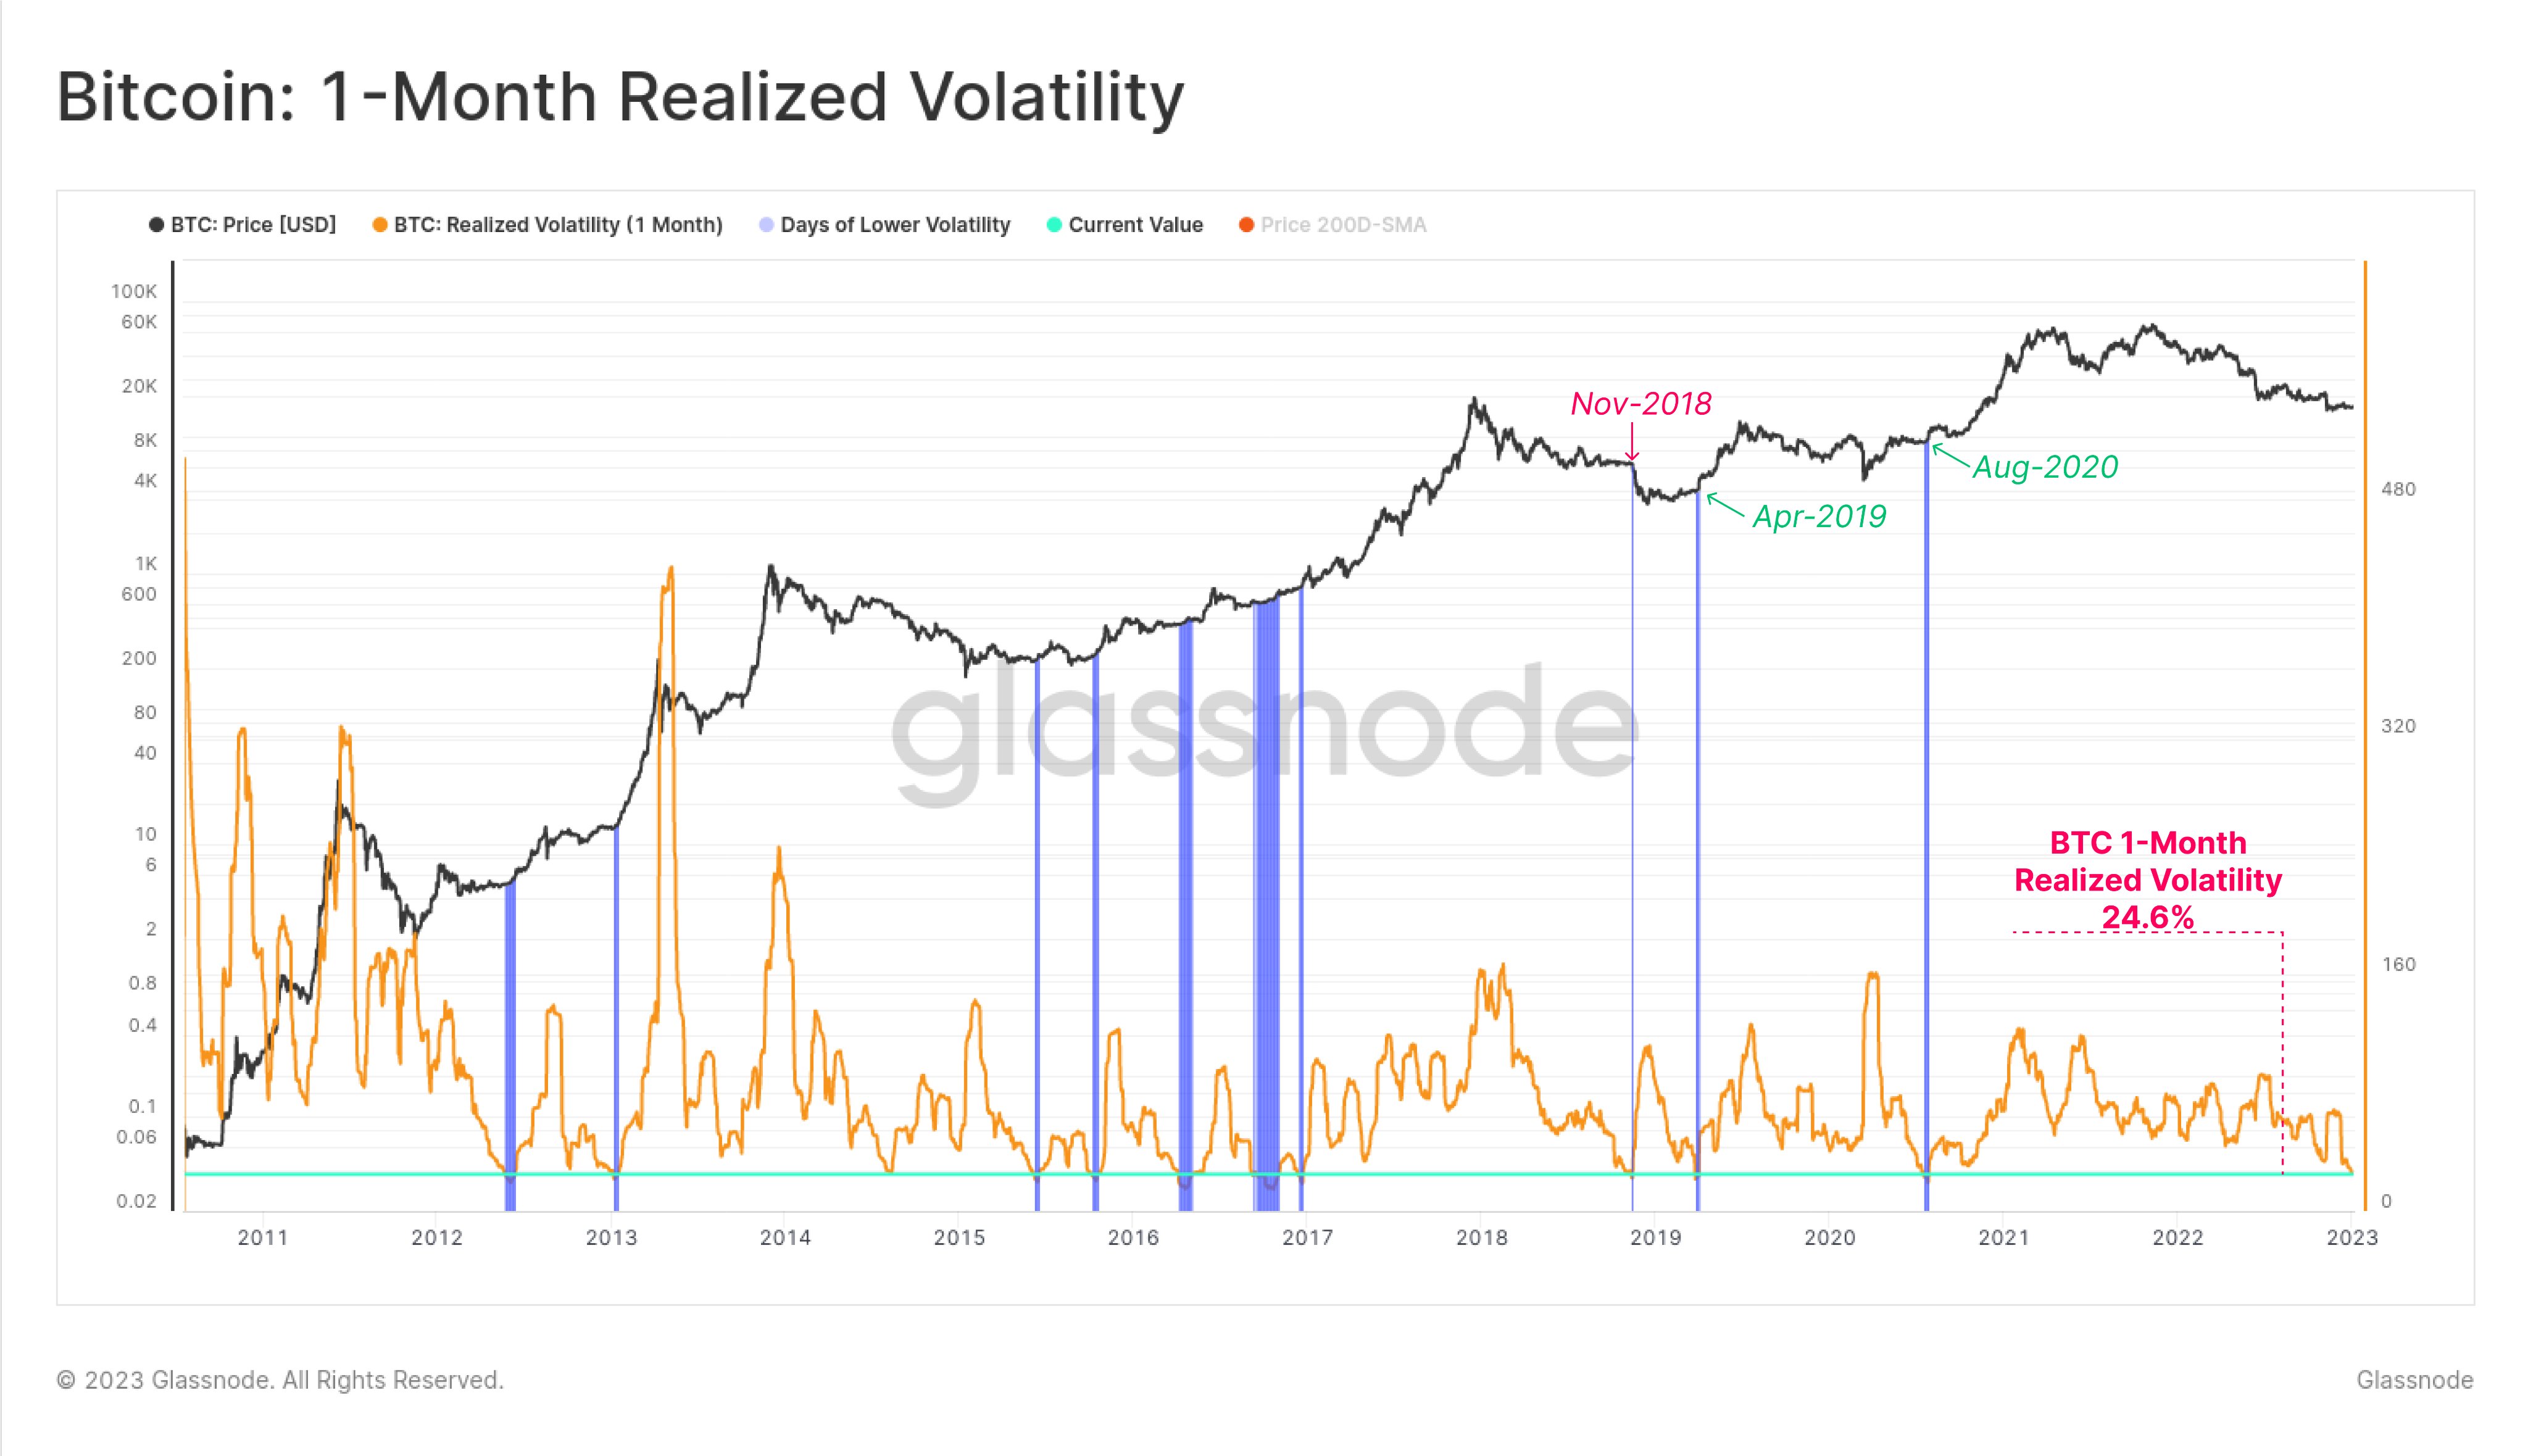 Bitcoin 1-month realized volatility